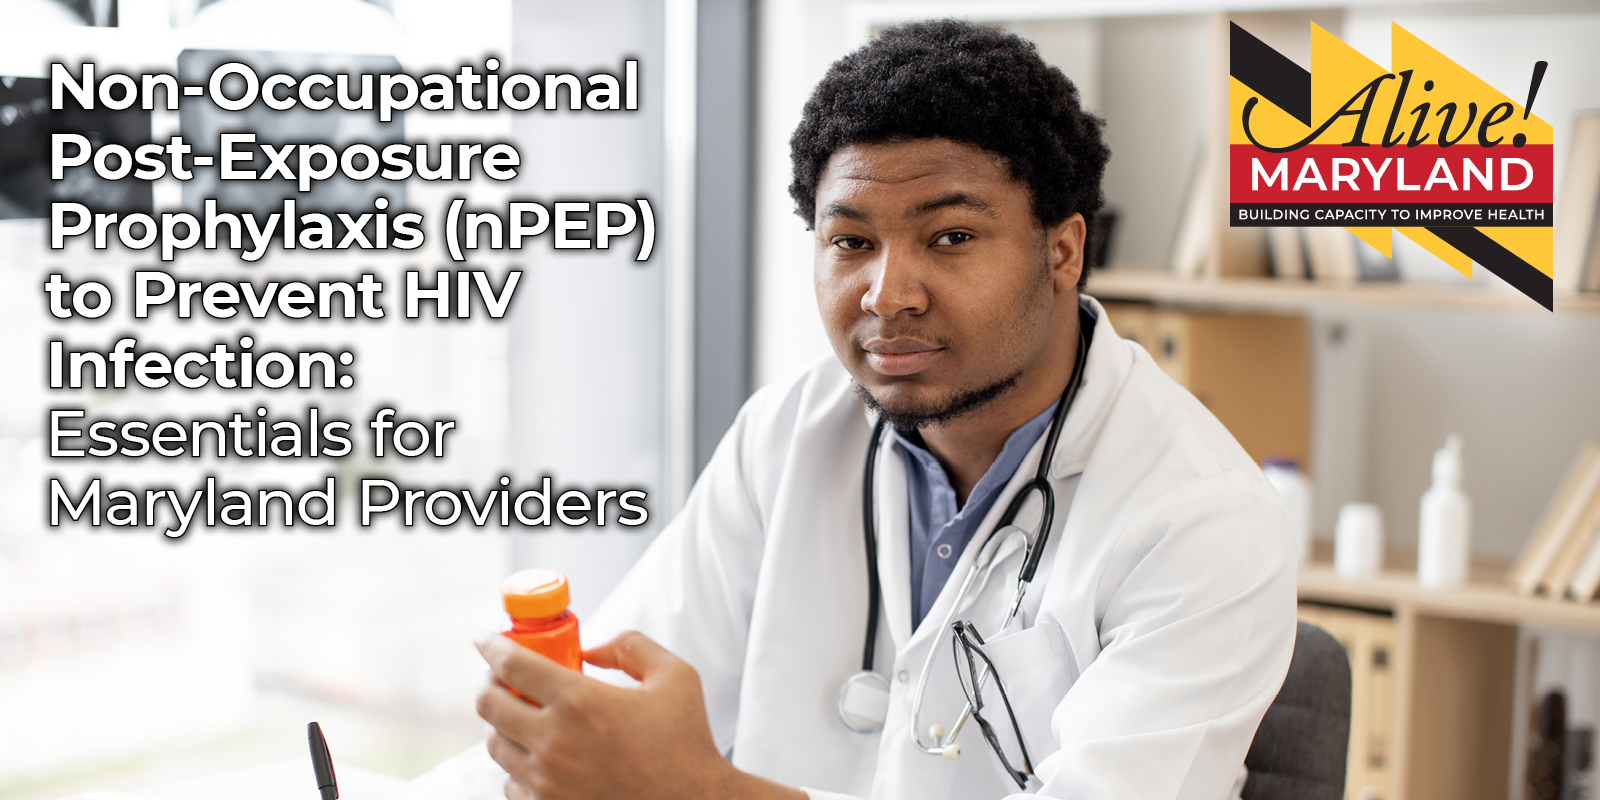 Non-occupational Post-Exposure Prophylaxis (nPEP) to Prevent HIV Infection: Essentials for Maryland Providers